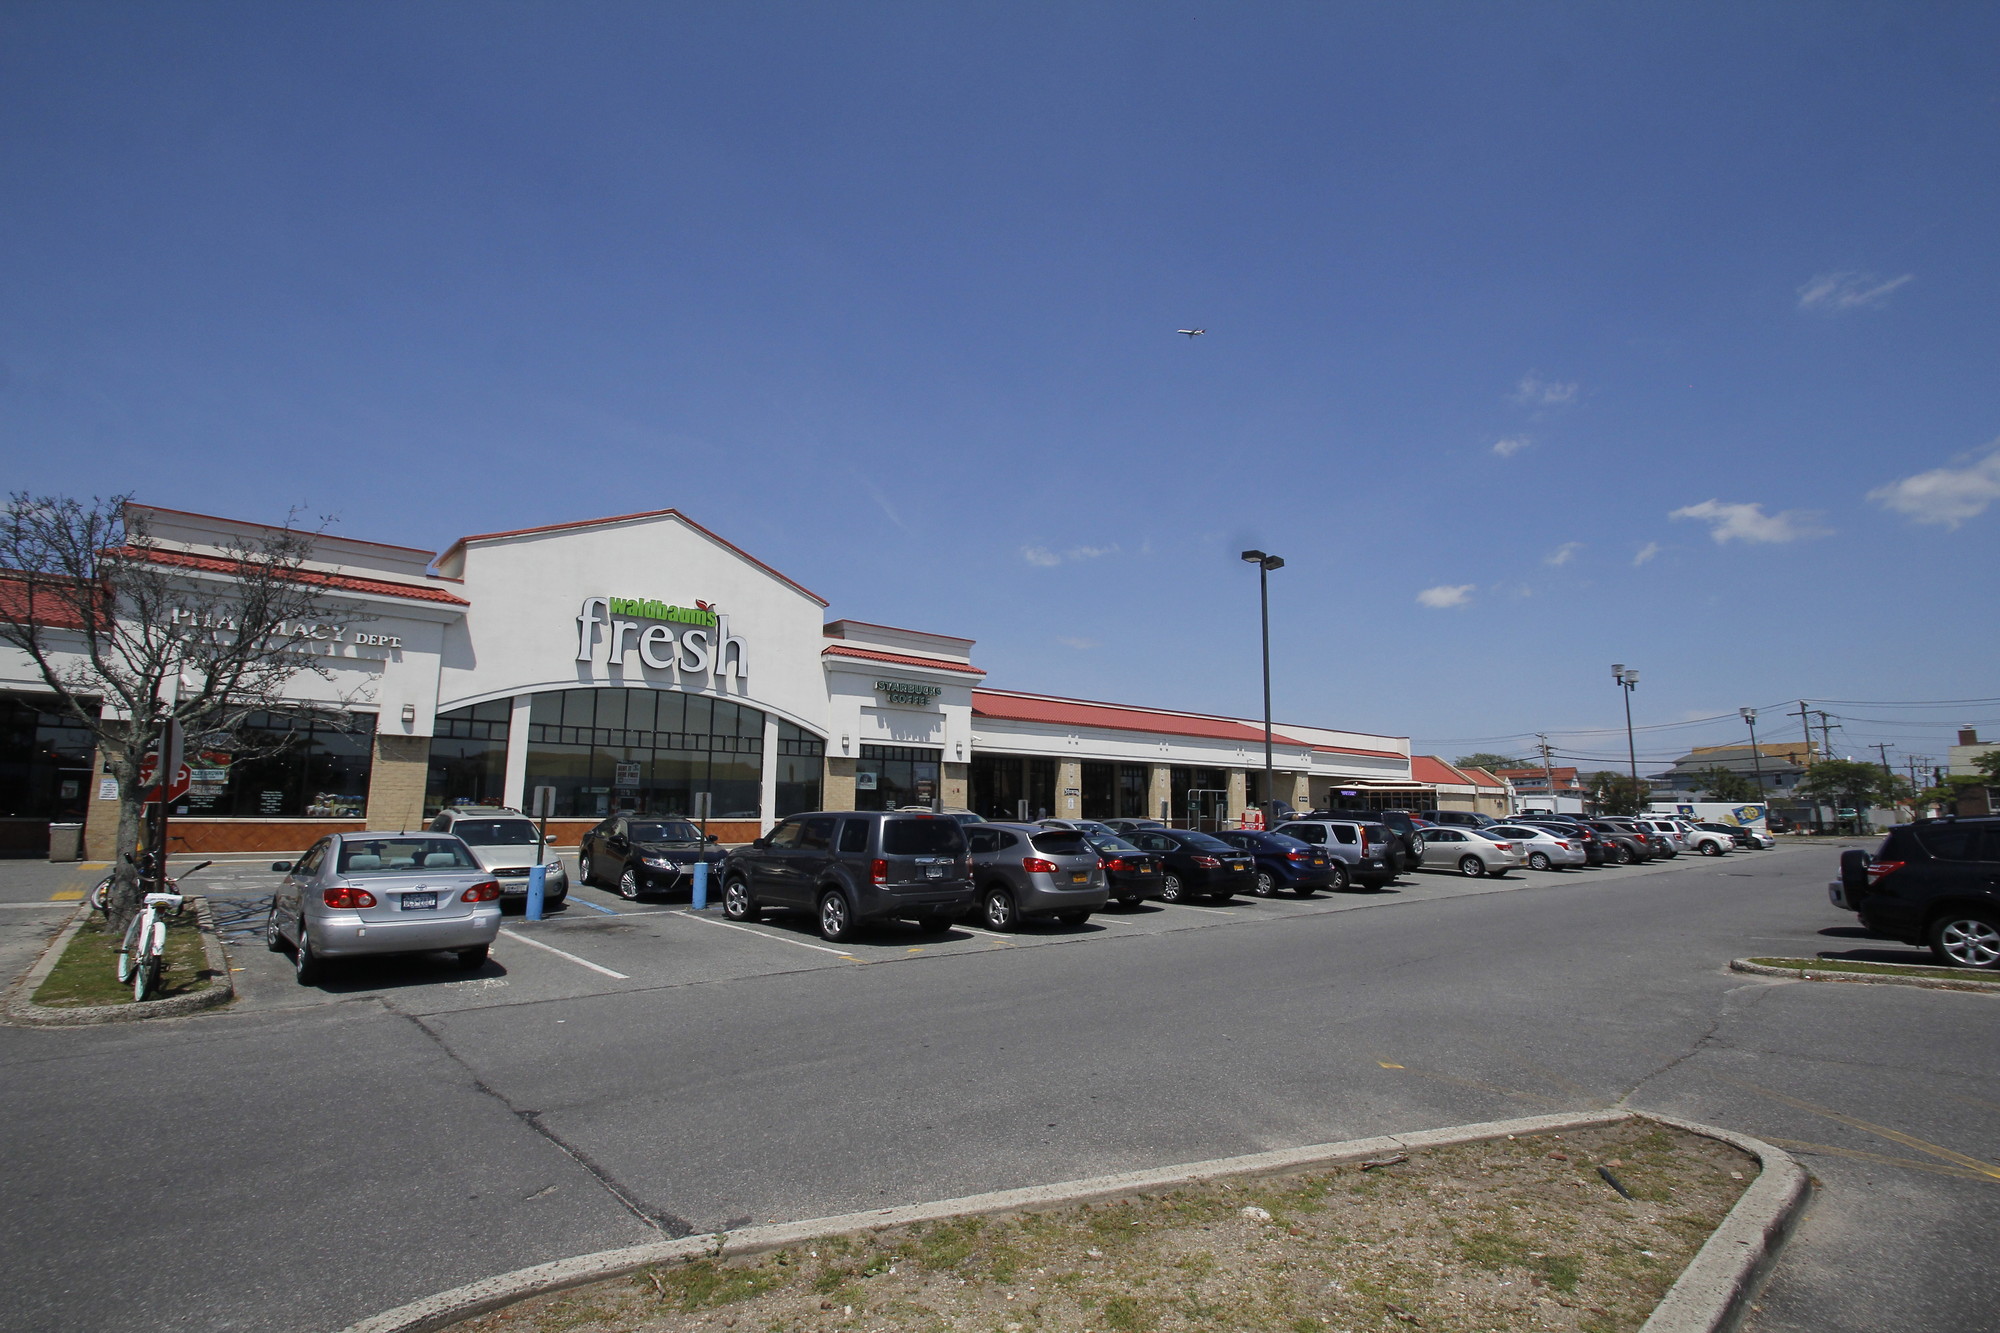 Built in 1984, many local officials say that the Waldbaum’s shopping center — a property previously made up of burned out buildings and run-down homes — marked a turning point in the city’s revitalization in the 1980s.